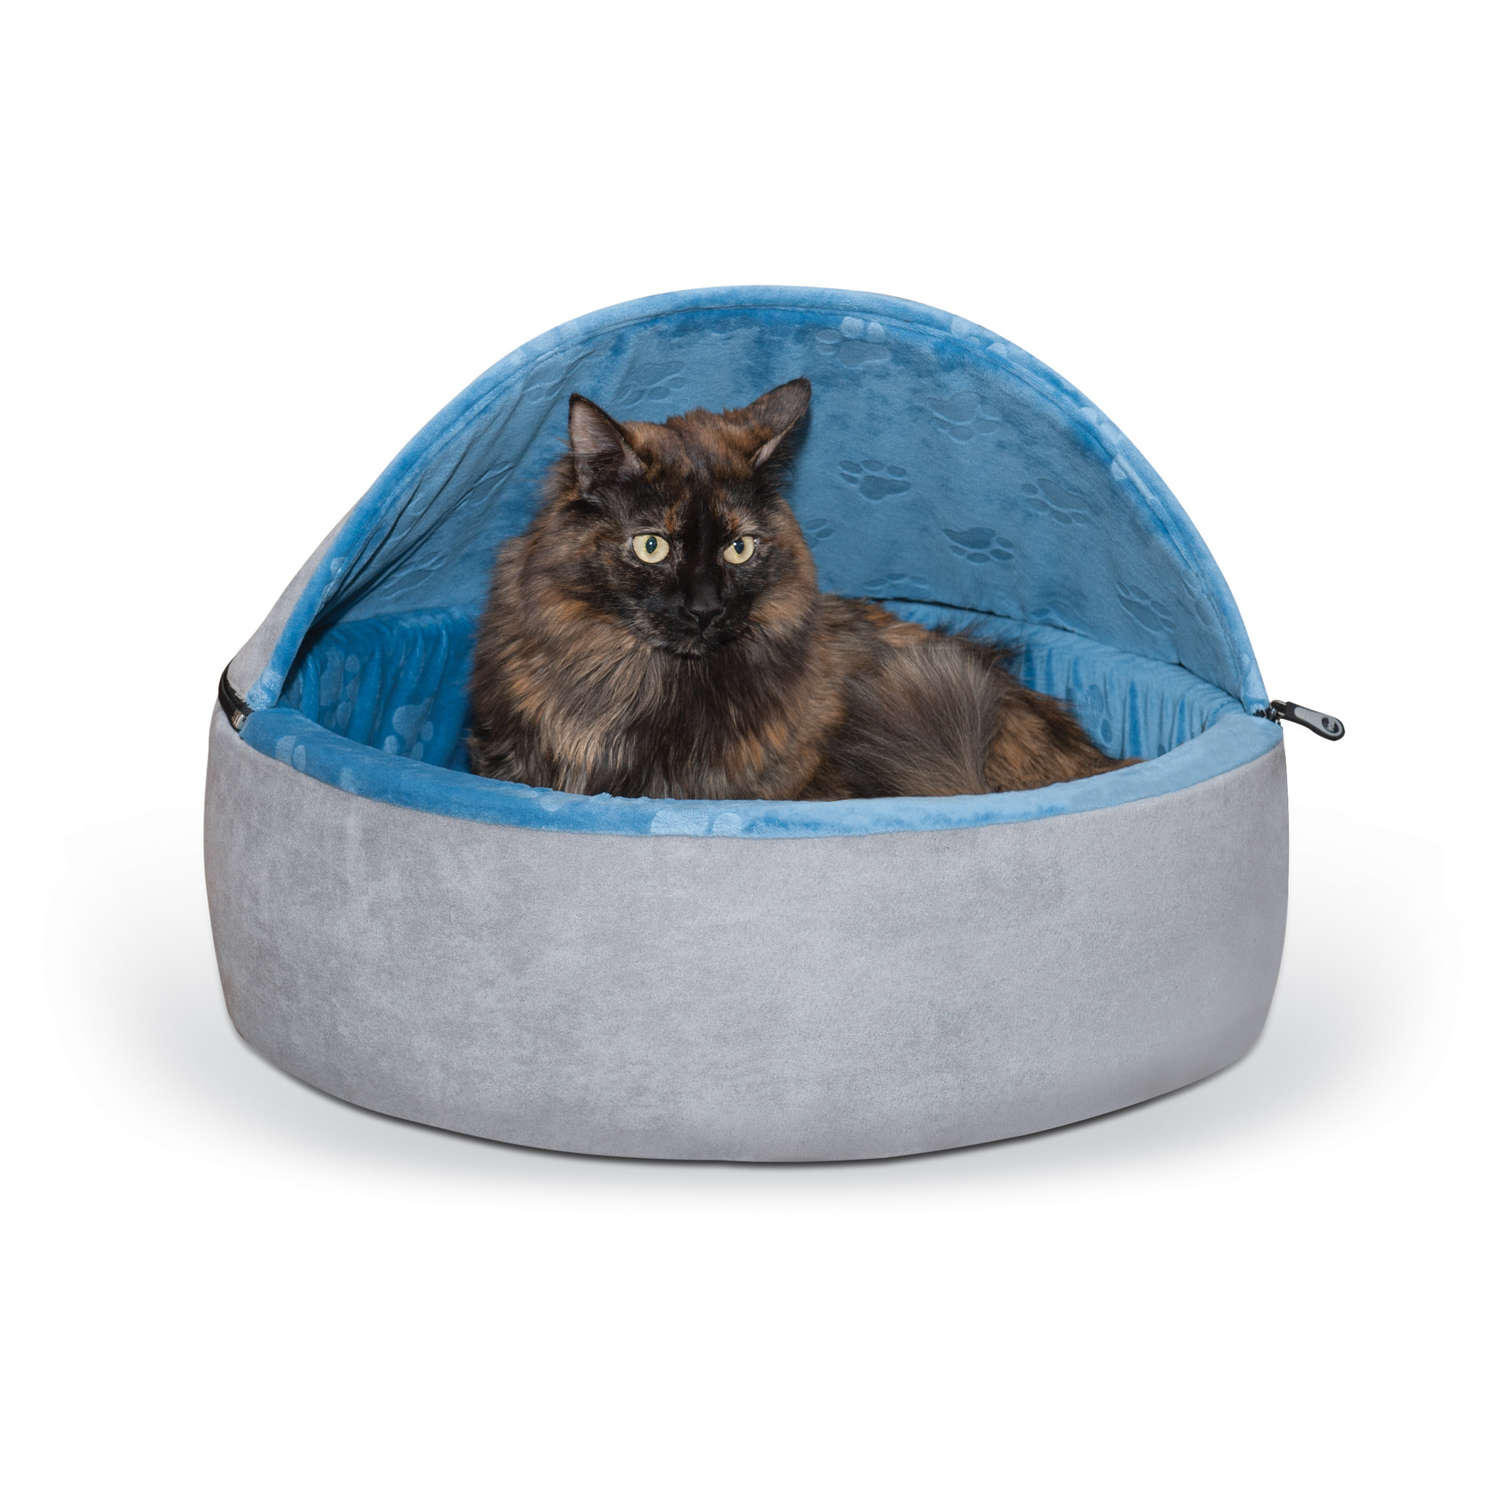 K&h Pet Products Kh2998 Self-warming Kitty Bed Hooded